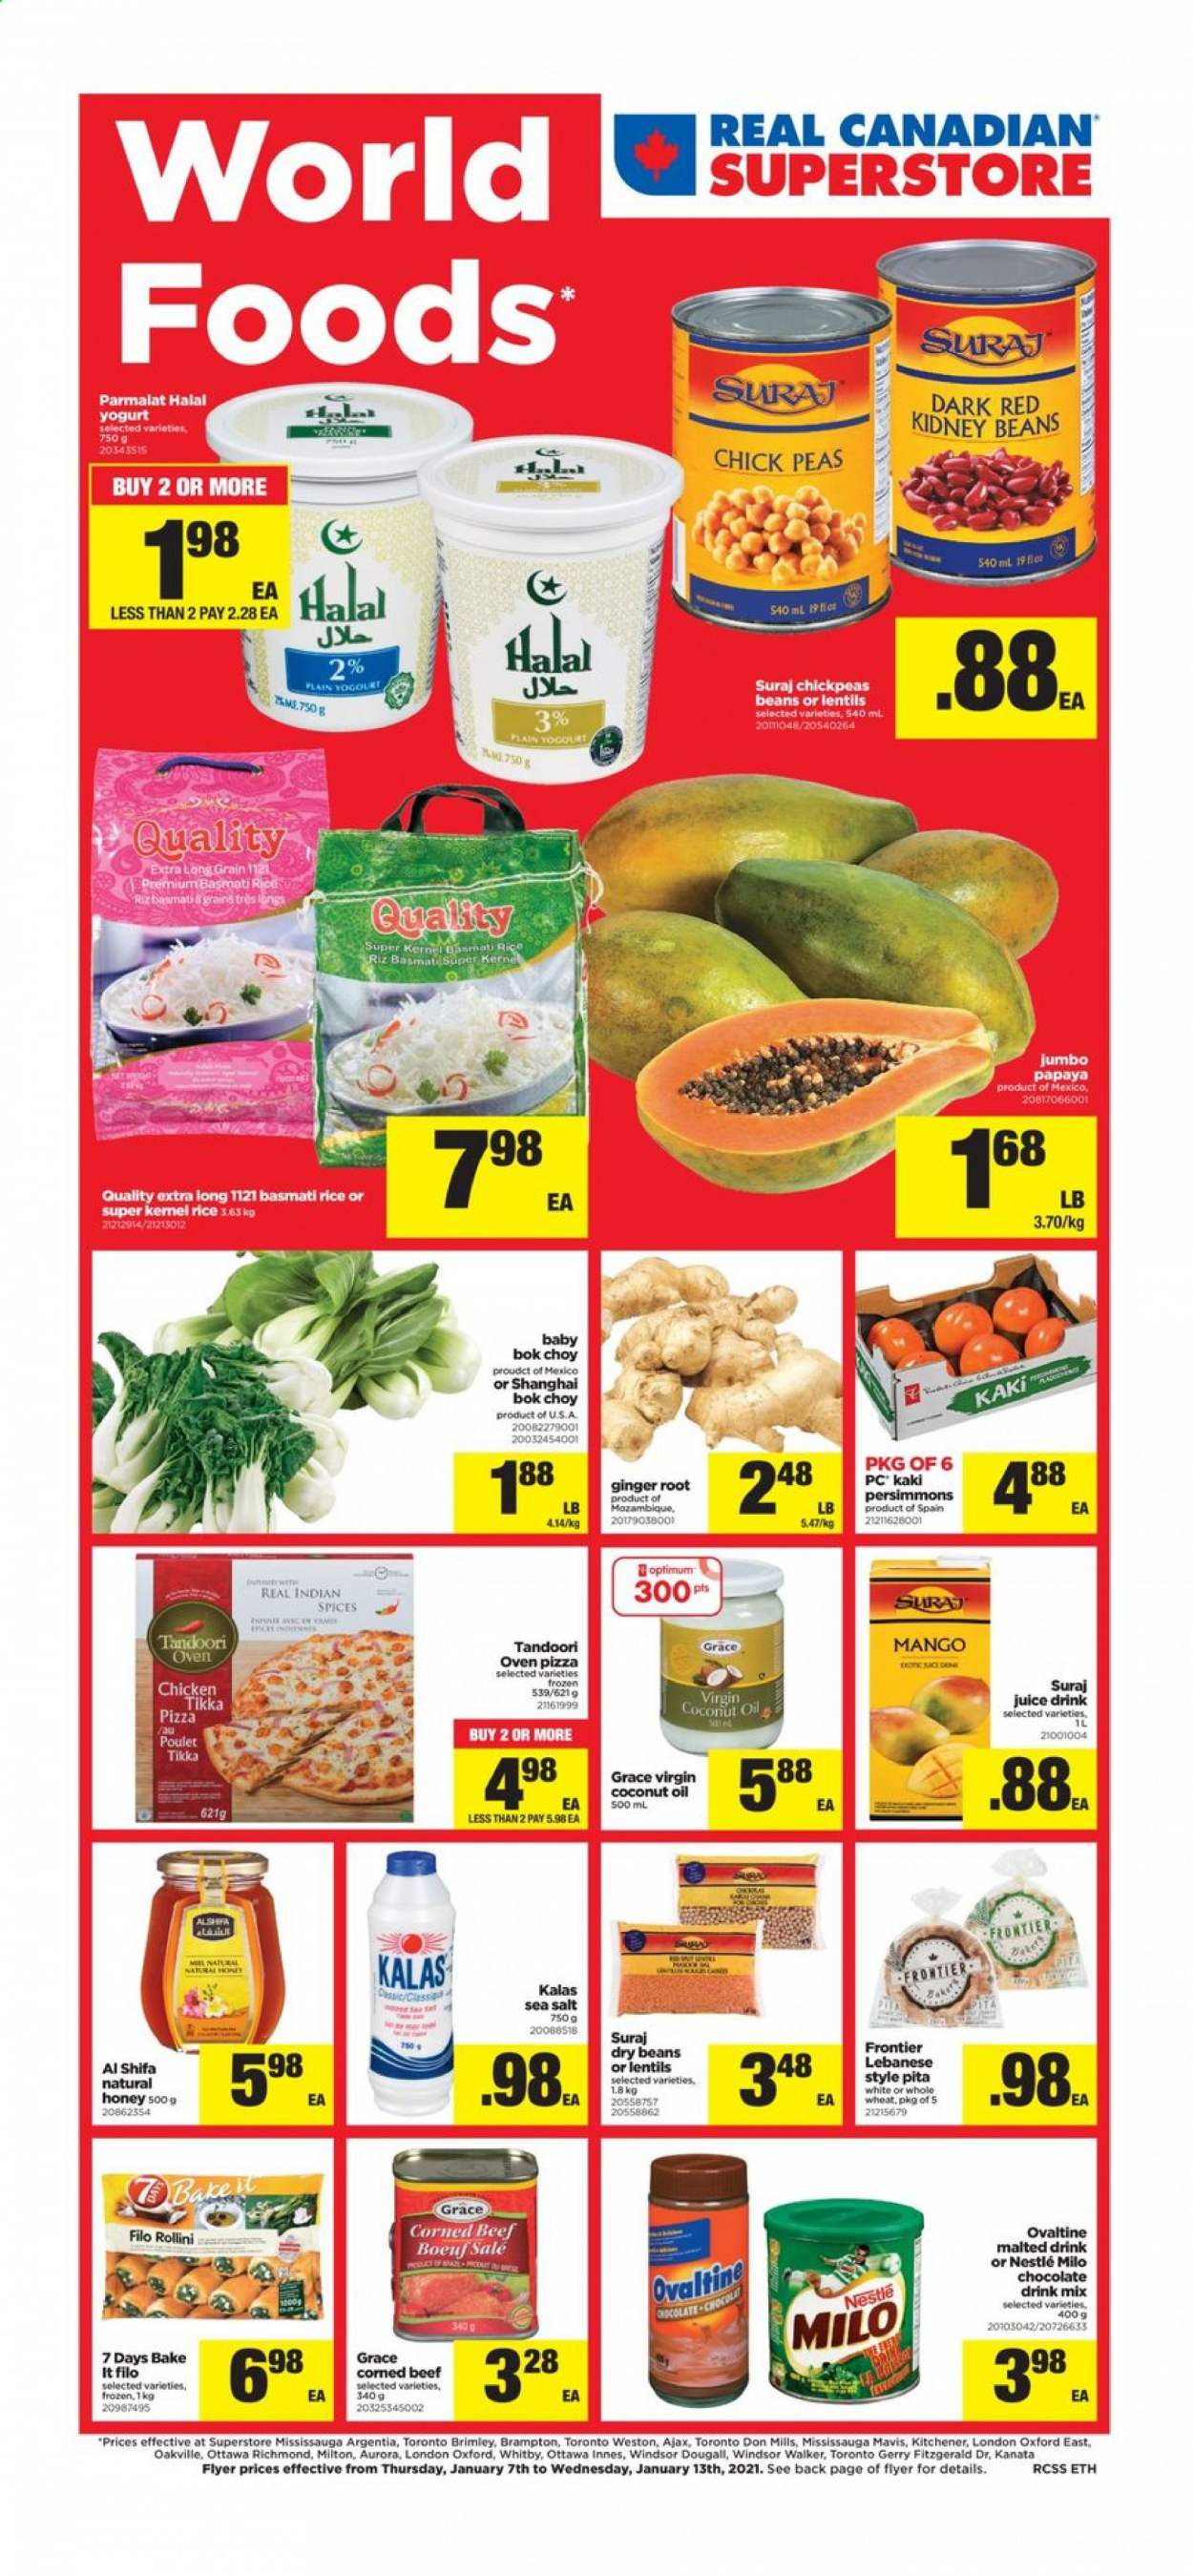 thumbnail - Real Canadian Superstore Flyer - January 07, 2021 - January 13, 2021 - Sales products - pita, beans, bok choy, ginger, peas, papaya, persimmons, pizza, corned beef, yoghurt, Parmalat, Milo, filo dough, chocolate, 7 Days, sea salt, lentils, kidney beans, basmati rice, chickpeas, dry beans, coconut oil, oil, honey, juice, beef meat, Ajax, Optimum, Nestlé. Page 1.